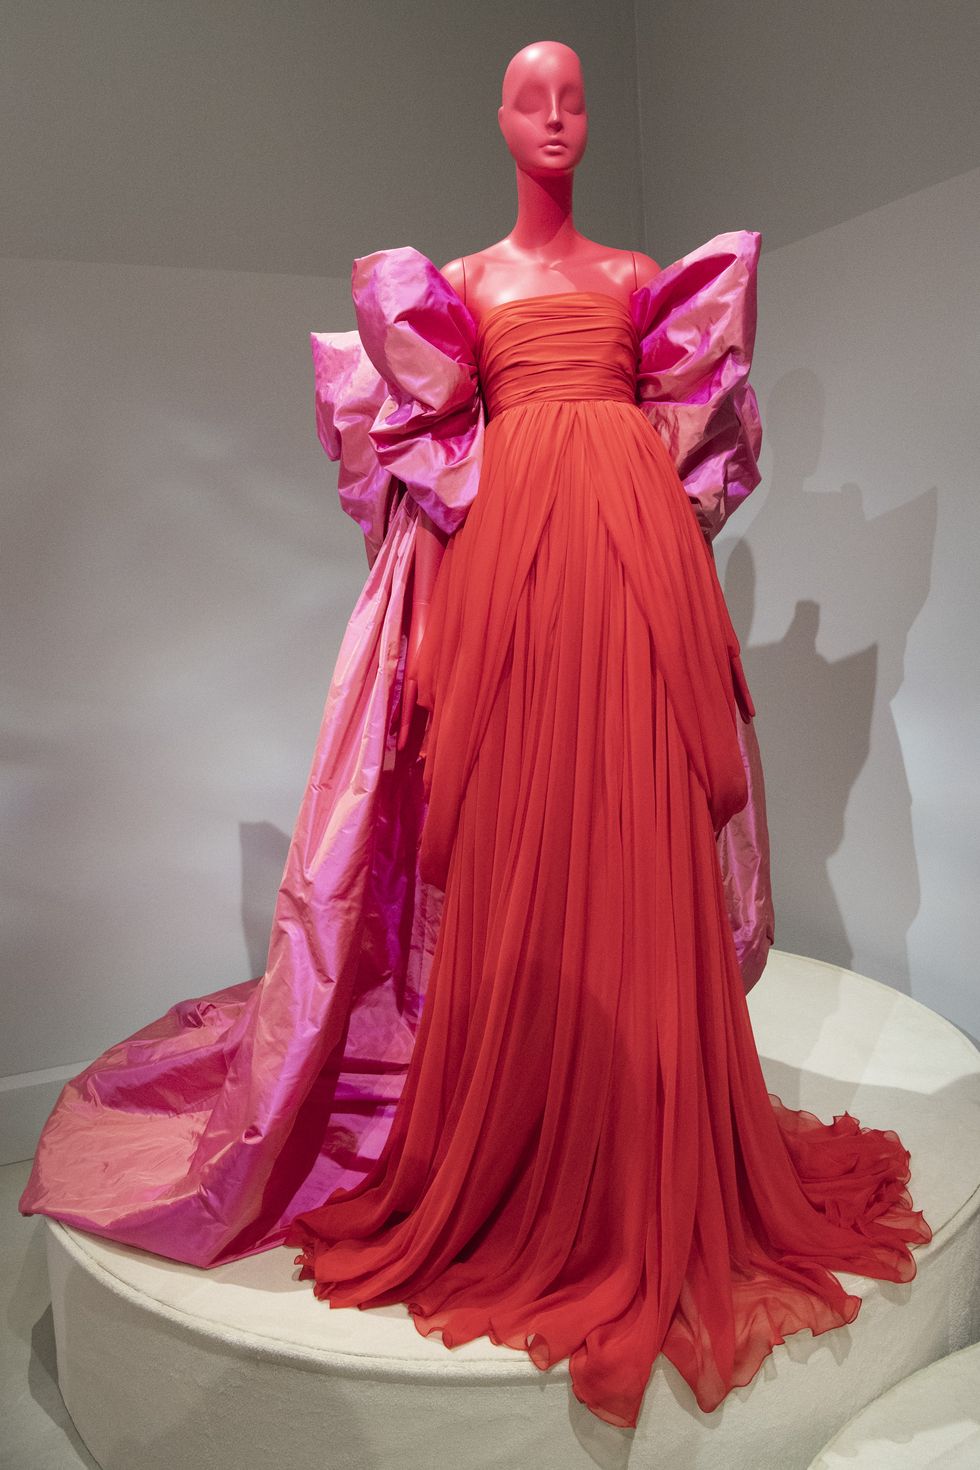 Dress, Pink, Clothing, Gown, Shoulder, Fashion, Haute couture, Figurine, Costume design, Ruffle, 